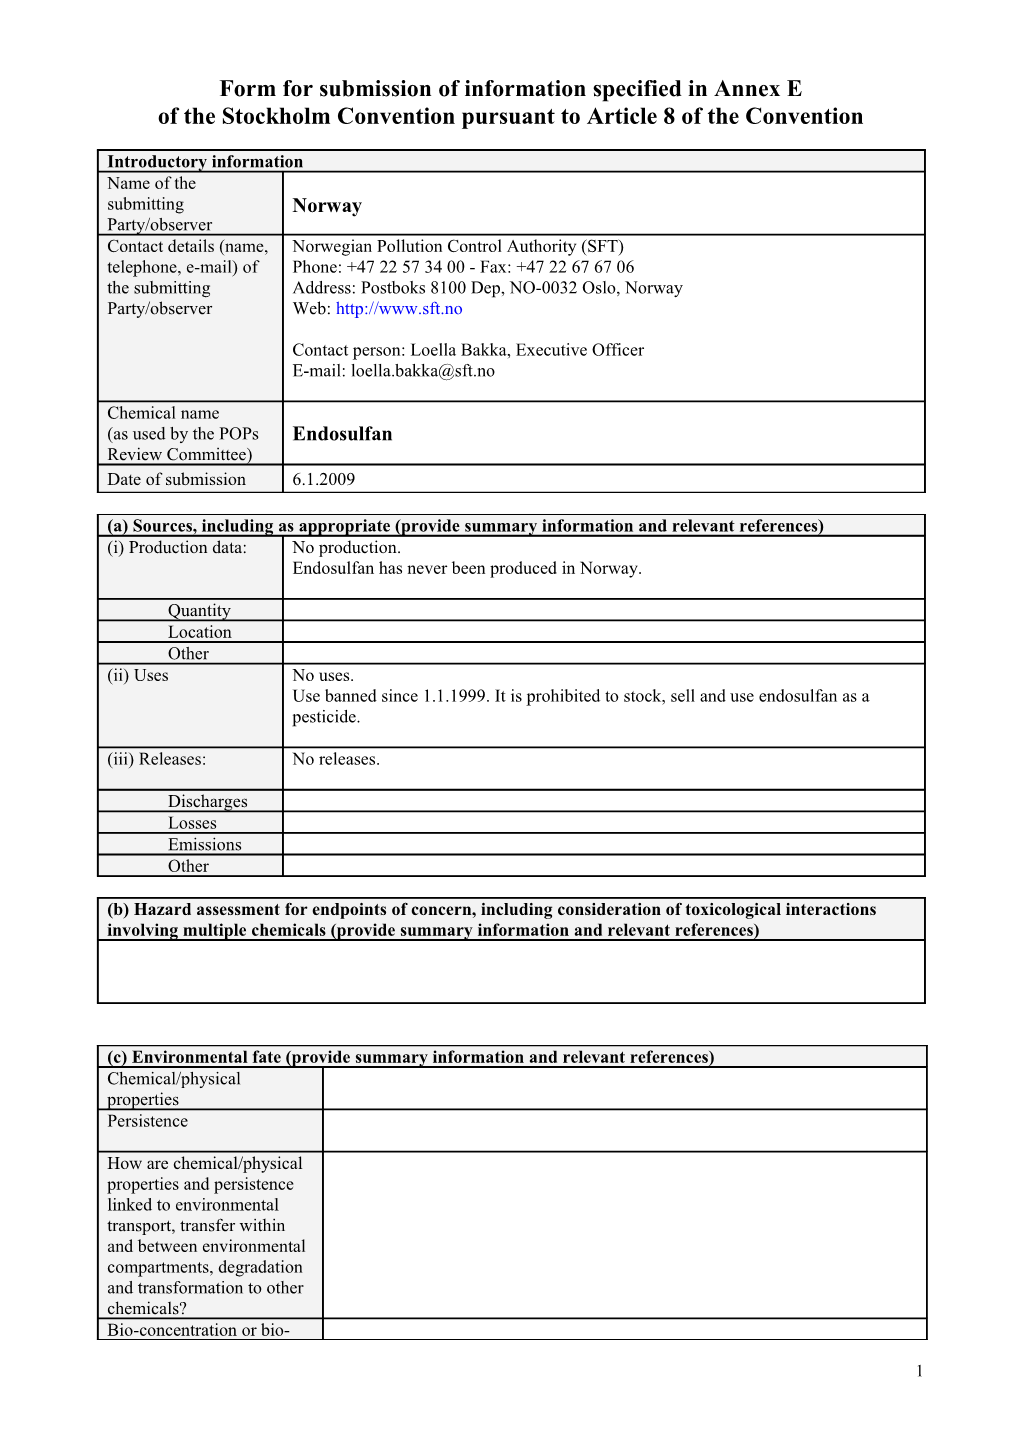 Form for Submission of Information Specified in Annex E